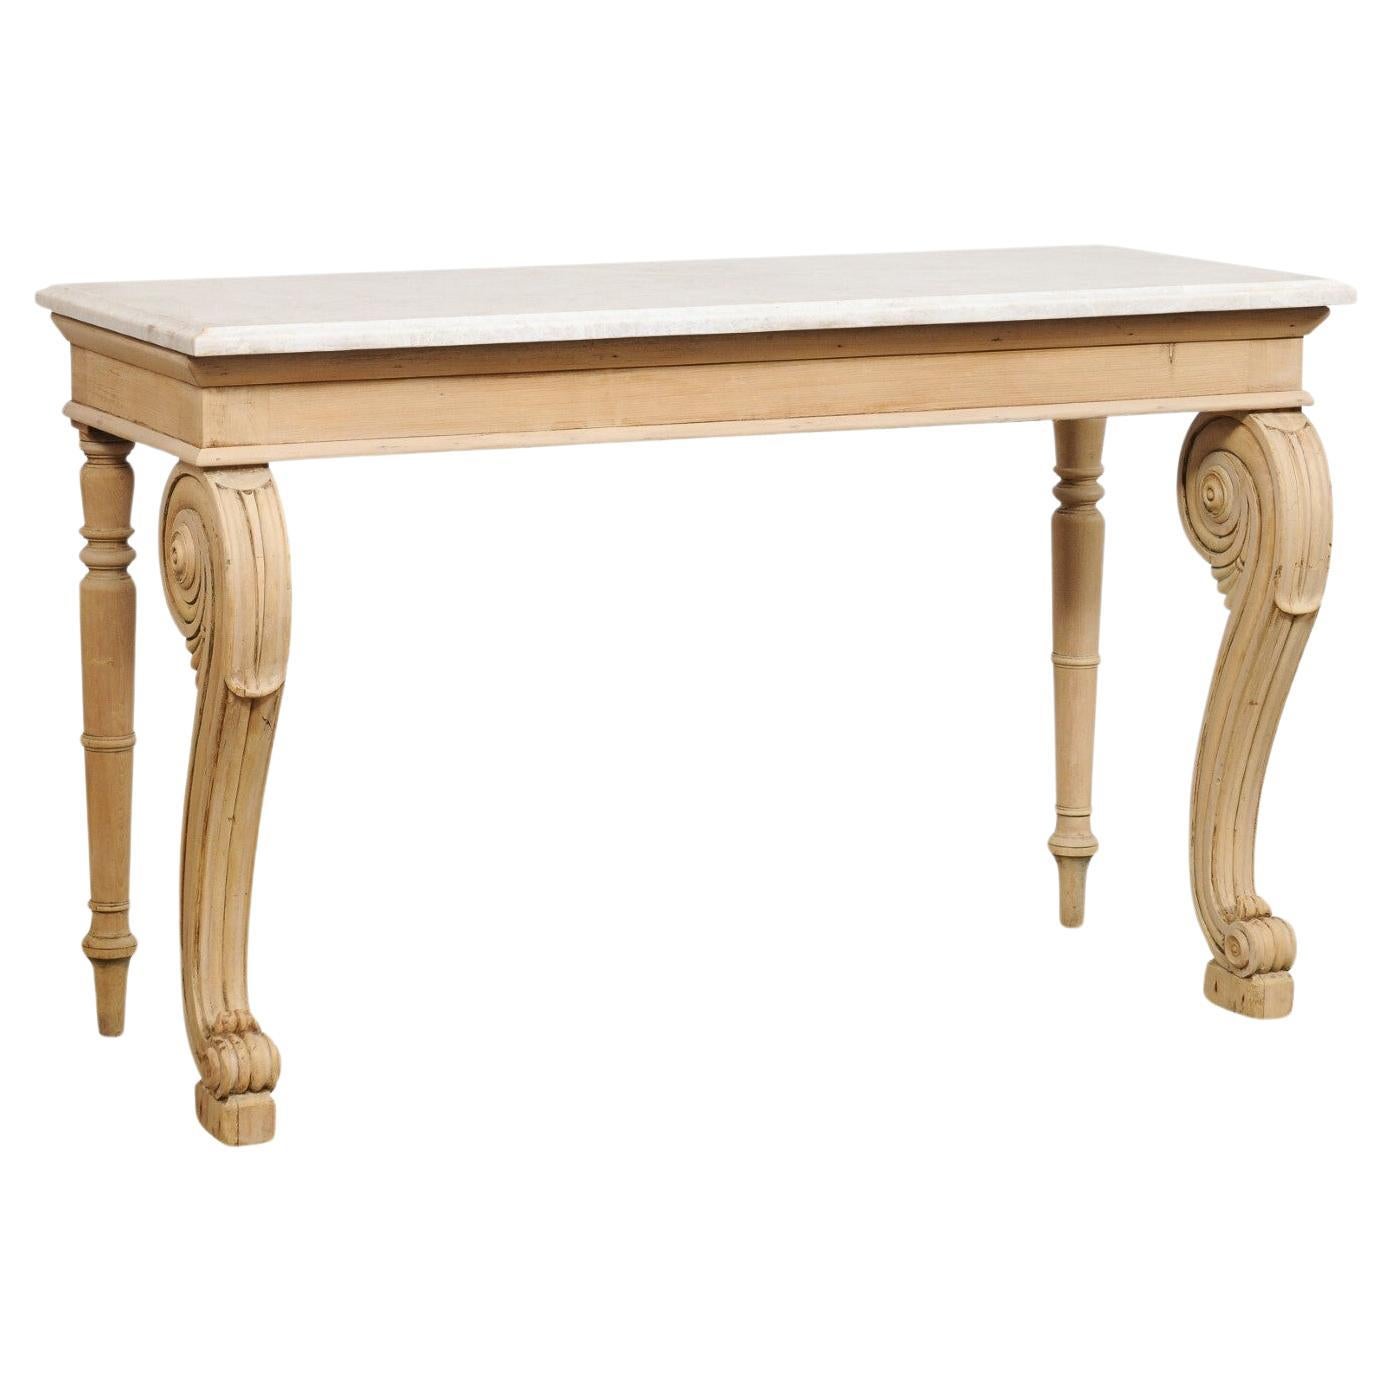 English Regency Period Bleached Wood Console w/Marble Top & Volute Carved Legs